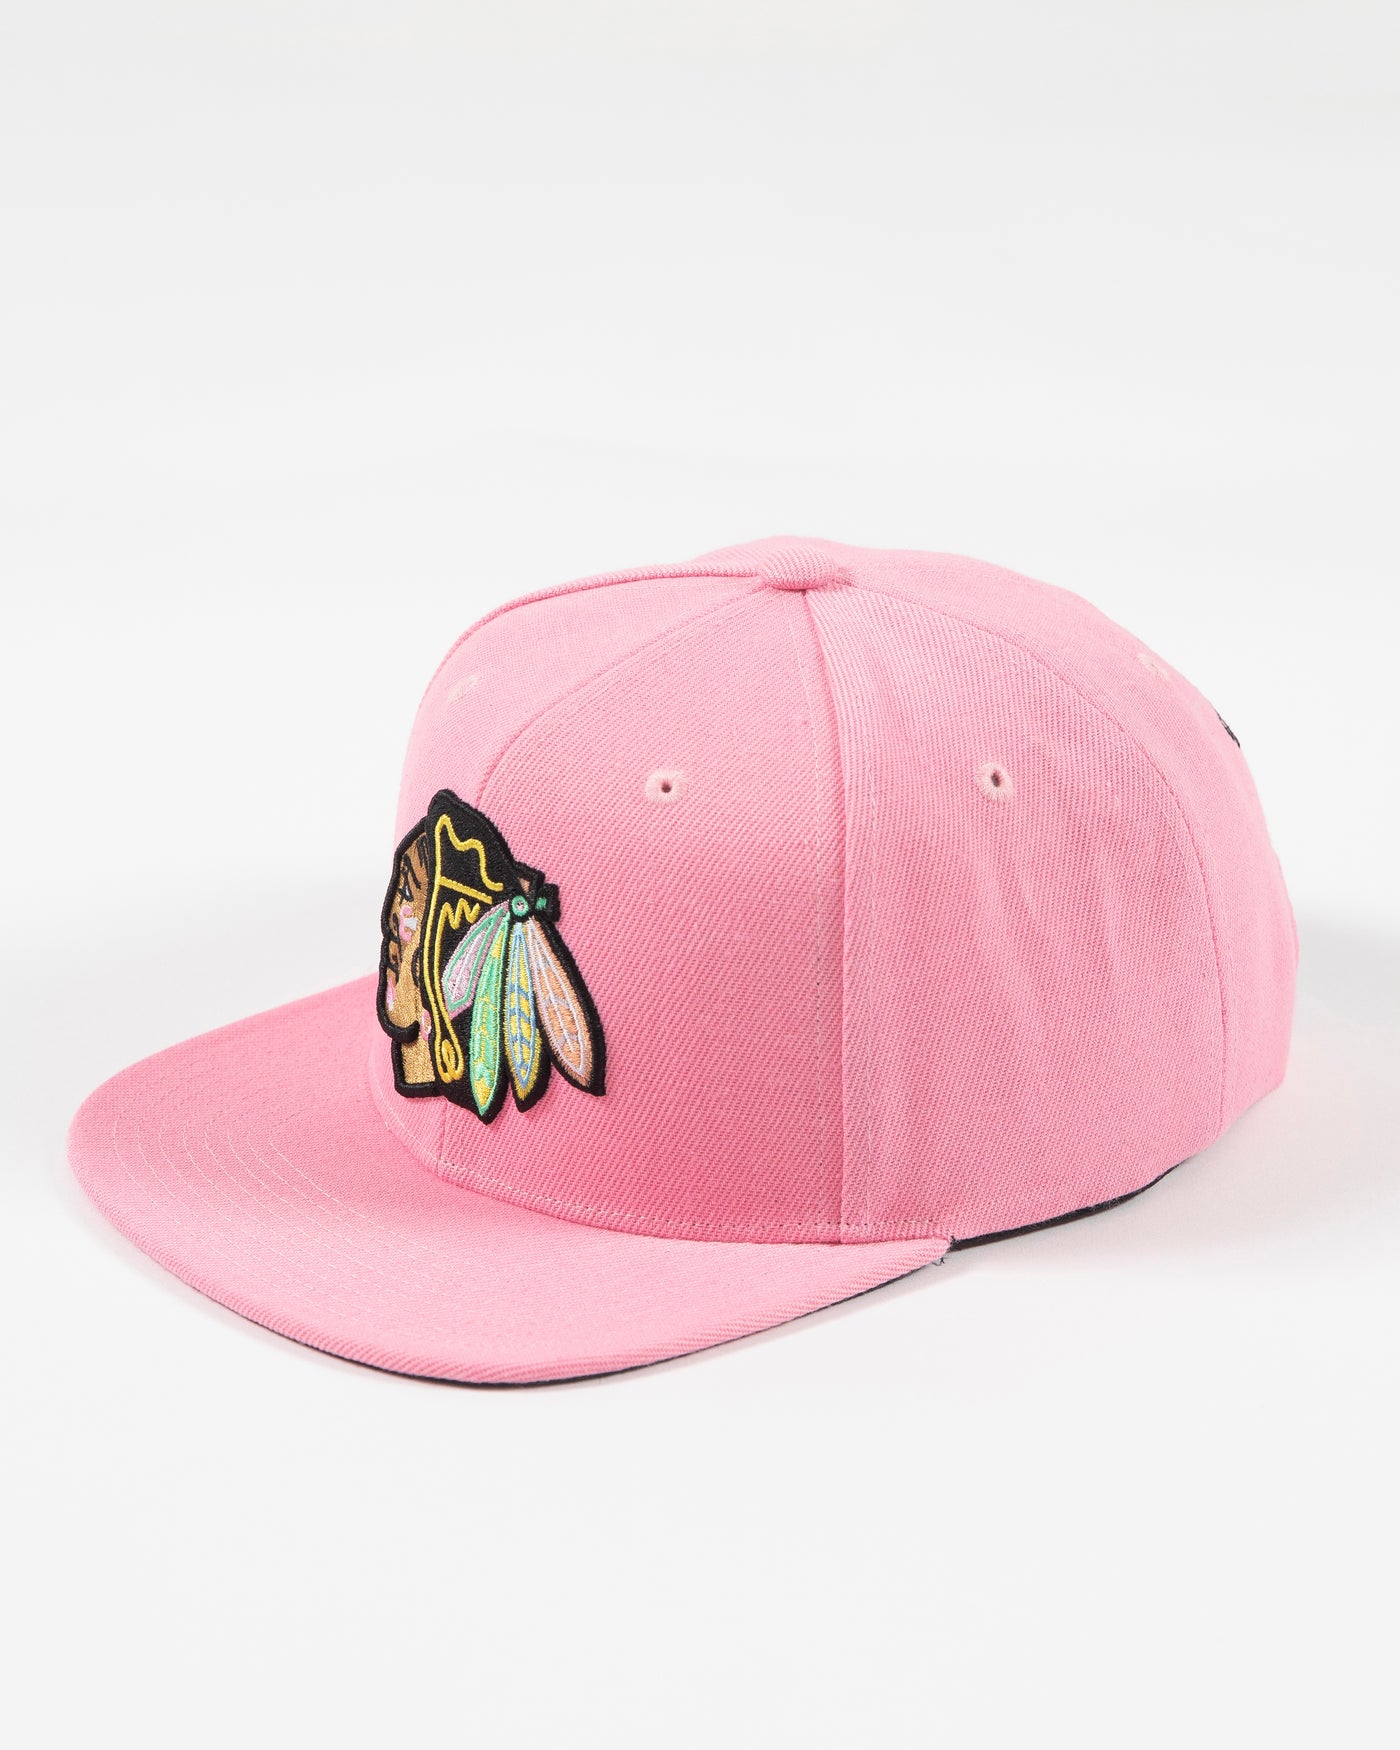 Mitchell & Ness pink snapback with Chicago Blackhawks primary logo embroidered on the front with pink accents - left angle lay flat